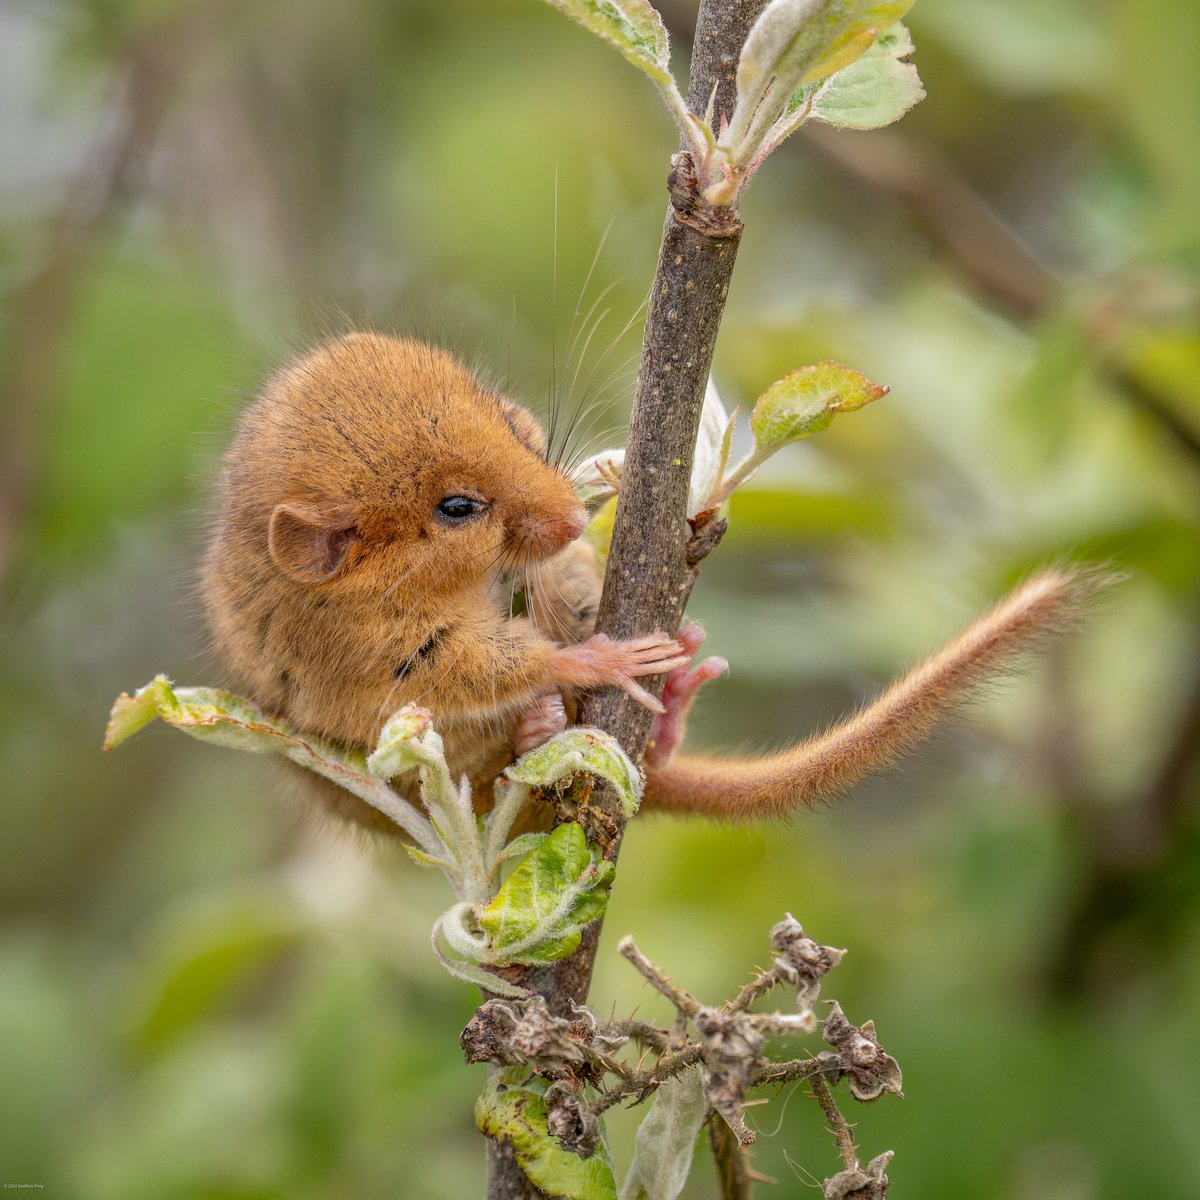 I wasn’t expecting to see a Dormouse at Martin Down in the middle of the day! You can’t get much cuter - a real highlight #dormouse #martindown